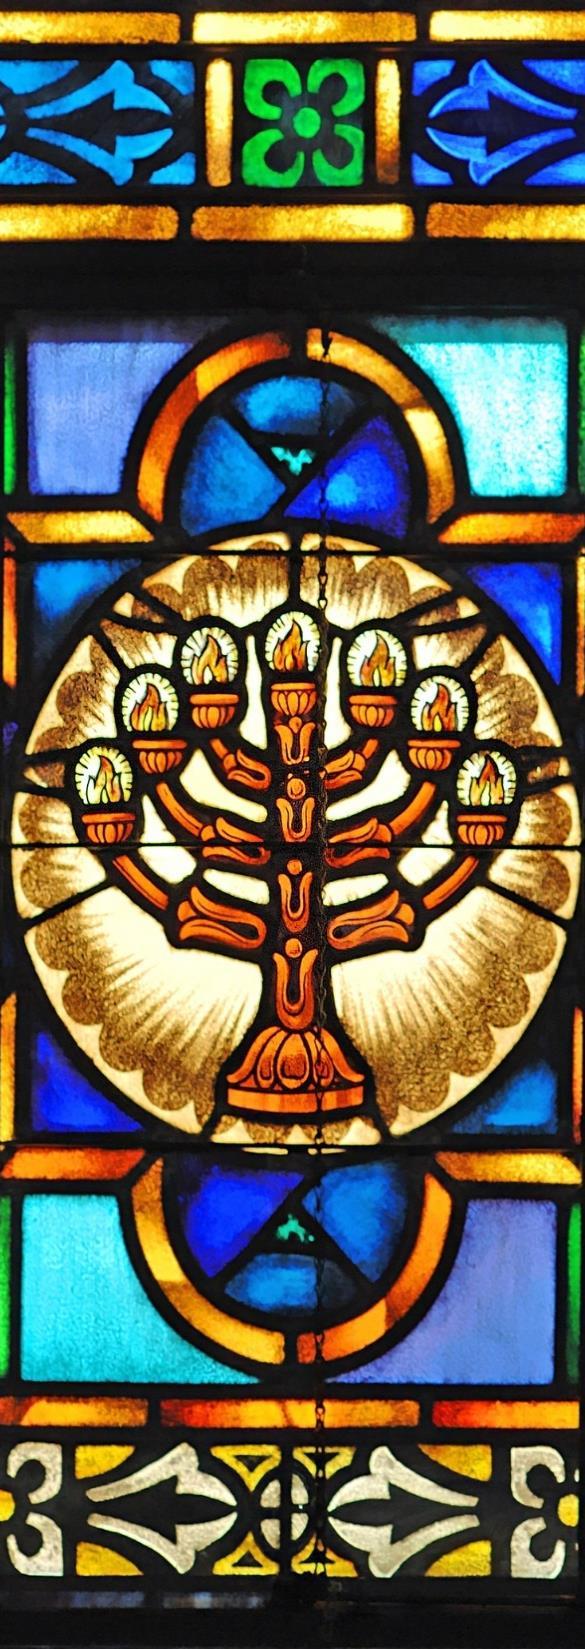 When John turned back to look in the direction of the voice speaking to him, he first saw the Temple menorah a seven-branched lamp that was once located in the Holy Place in the Temple in Jerusalem.